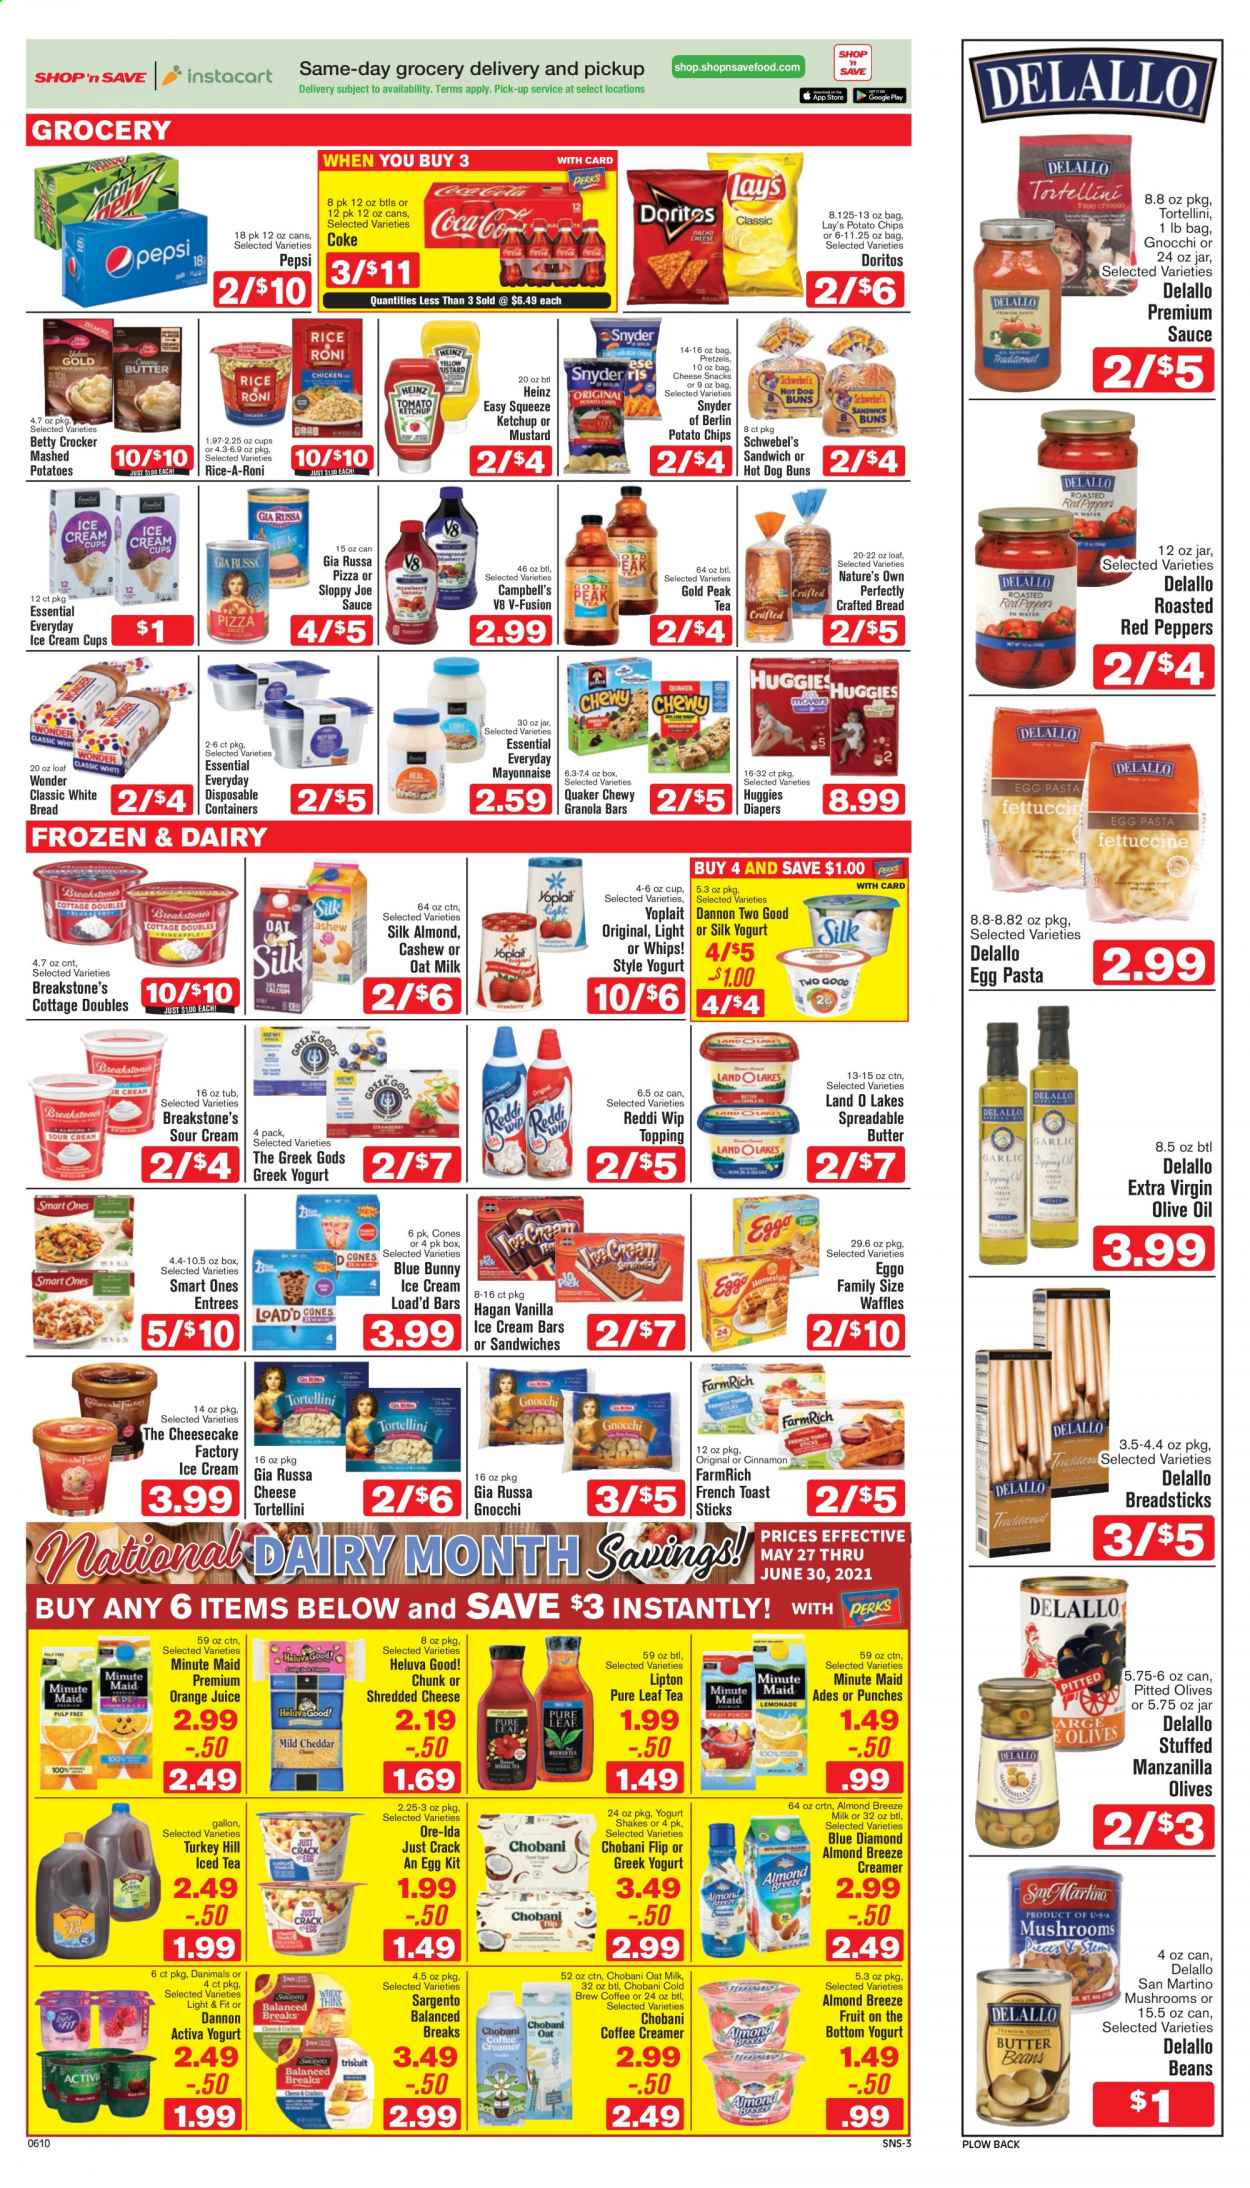 thumbnail - Shop ‘n Save Flyer - 06/10/2021 - 06/16/2021 - Sales products - bread, white bread, pretzels, buns, waffles, peppers, red peppers, Campbell's, gnocchi, mashed potatoes, pizza, sandwich, pasta, sauce, tortellini, Quaker, shredded cheese, Sargento, greek yoghurt, yoghurt, Yoplait, Chobani, Dannon, Danimals, milk, Almond Breeze, shake, oat milk, butter, spreadable butter, sour cream, creamer, mayonnaise, ice cream, ice cream bars, Blue Bunny, Ore-Ida, snack, bread sticks, Doritos, potato chips, Lay’s, topping, Heinz, olives, granola bar, rice, cinnamon, mustard, ketchup, extra virgin olive oil, olive oil, oil, Blue Diamond, Pepsi, orange juice, juice, Lipton, ice tea, Gold Peak Tea, fruit punch, Pure Leaf, Nature's Own. Page 3.